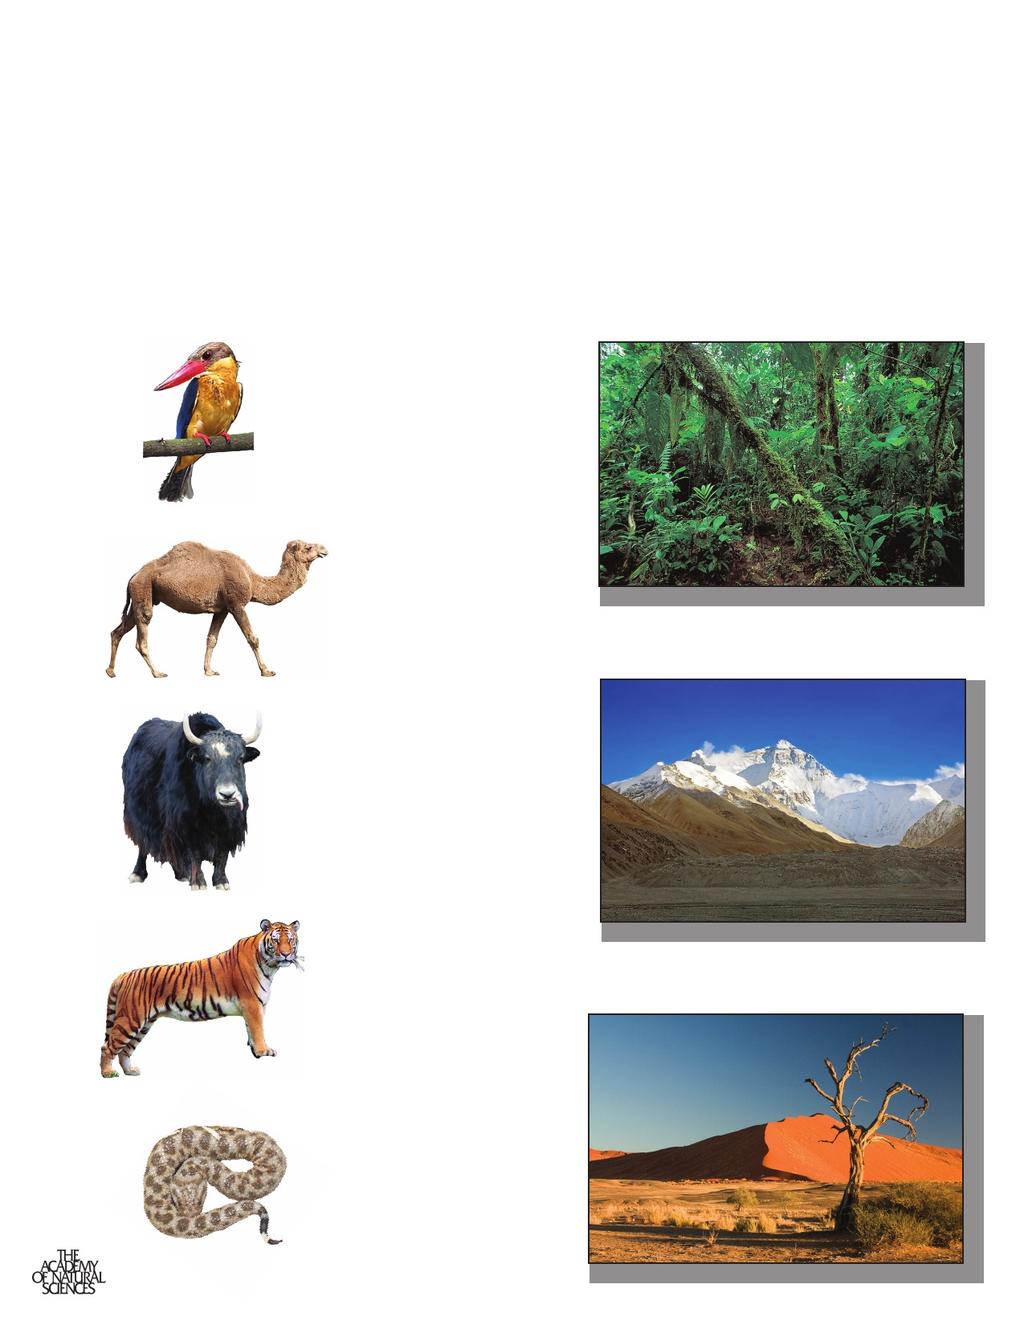 Where Do I Belong? Match the animals below to the habitat you think they live based on what you have learned so far.